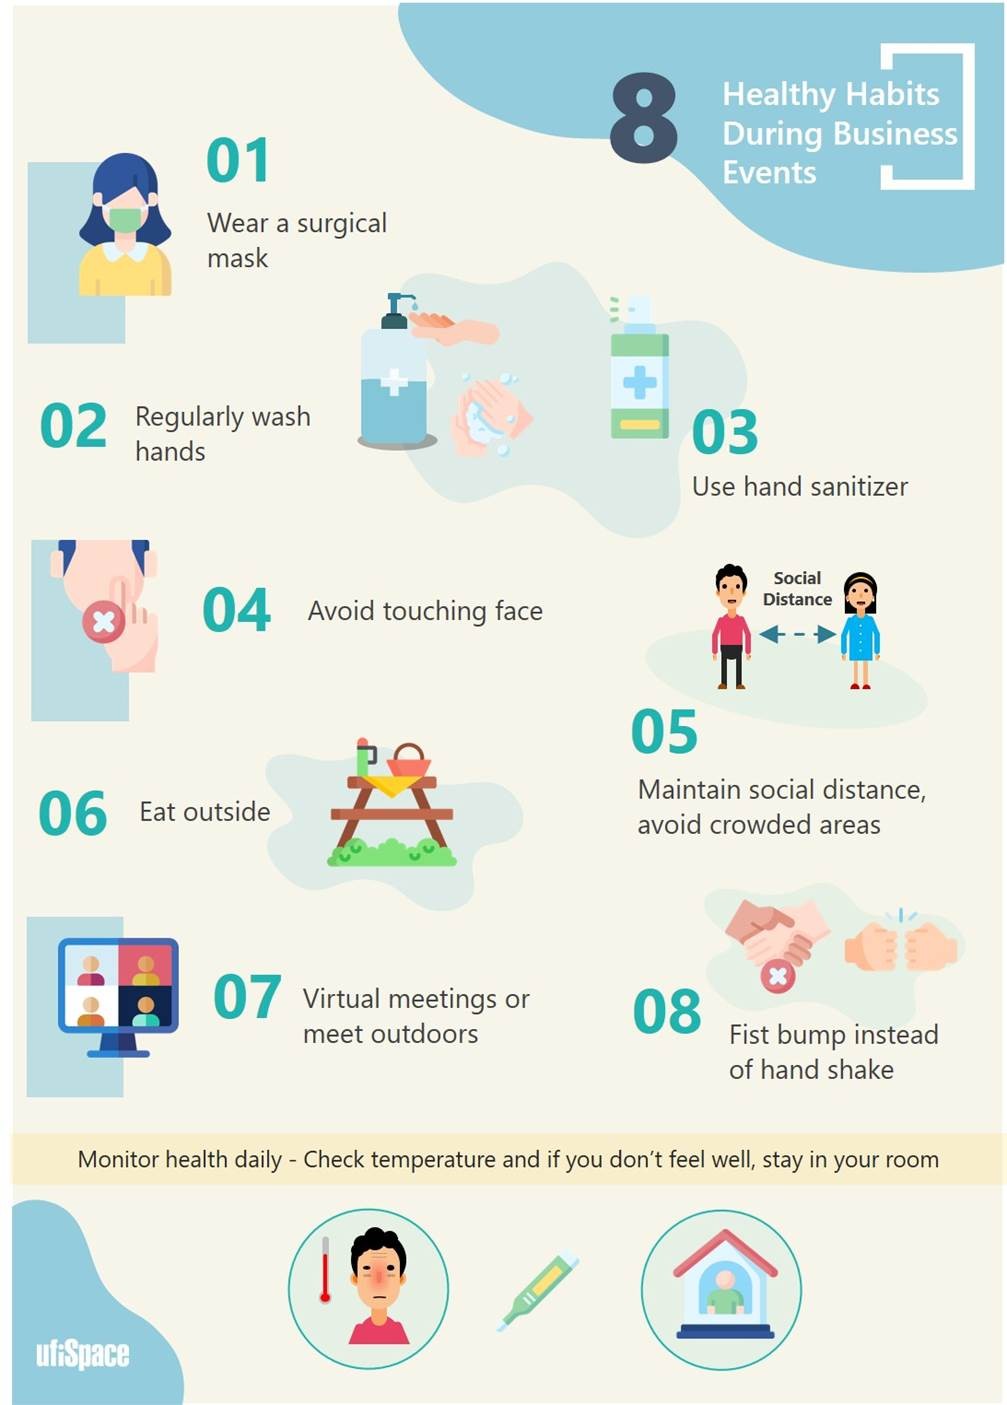 8 Healthy Habits for Business Events Infographic